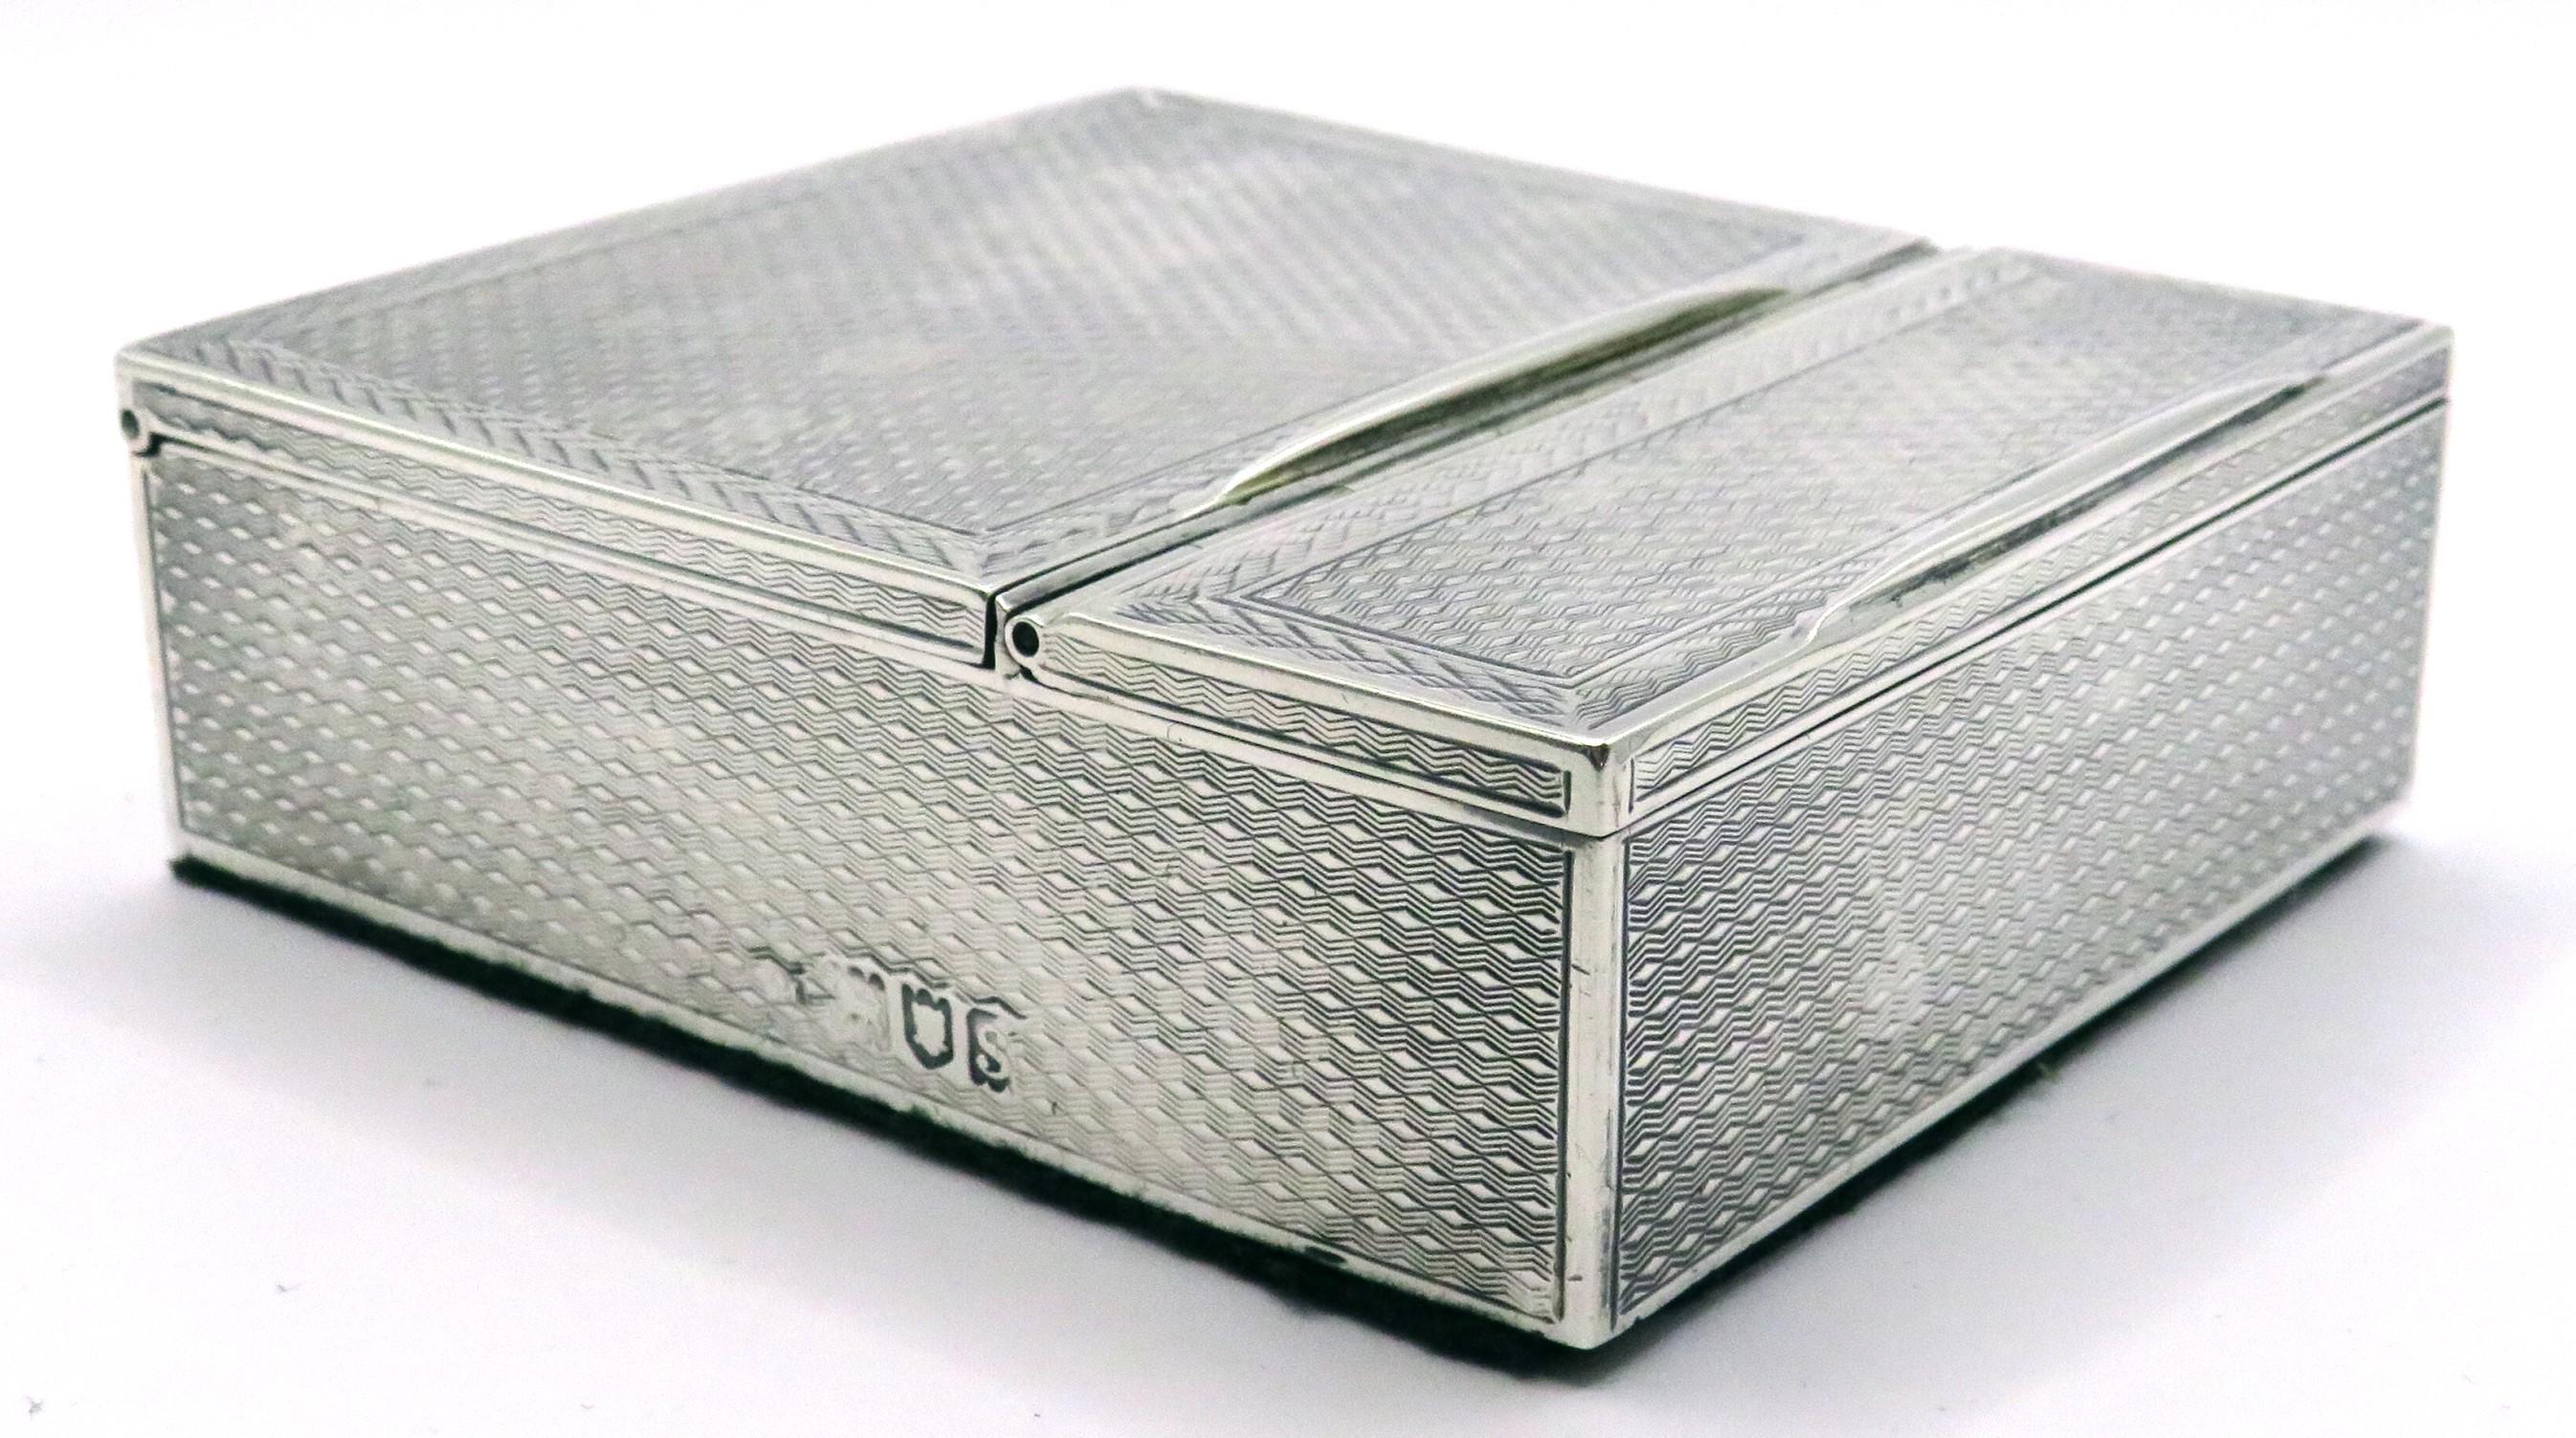 A very handsome & substantial early 20th century Art Deco sterling silver stamp box. The case richly decorated overall with striking basket-weave & herringbone machined motifs, the top fitted with two lidded compartments with gilded interiors, the